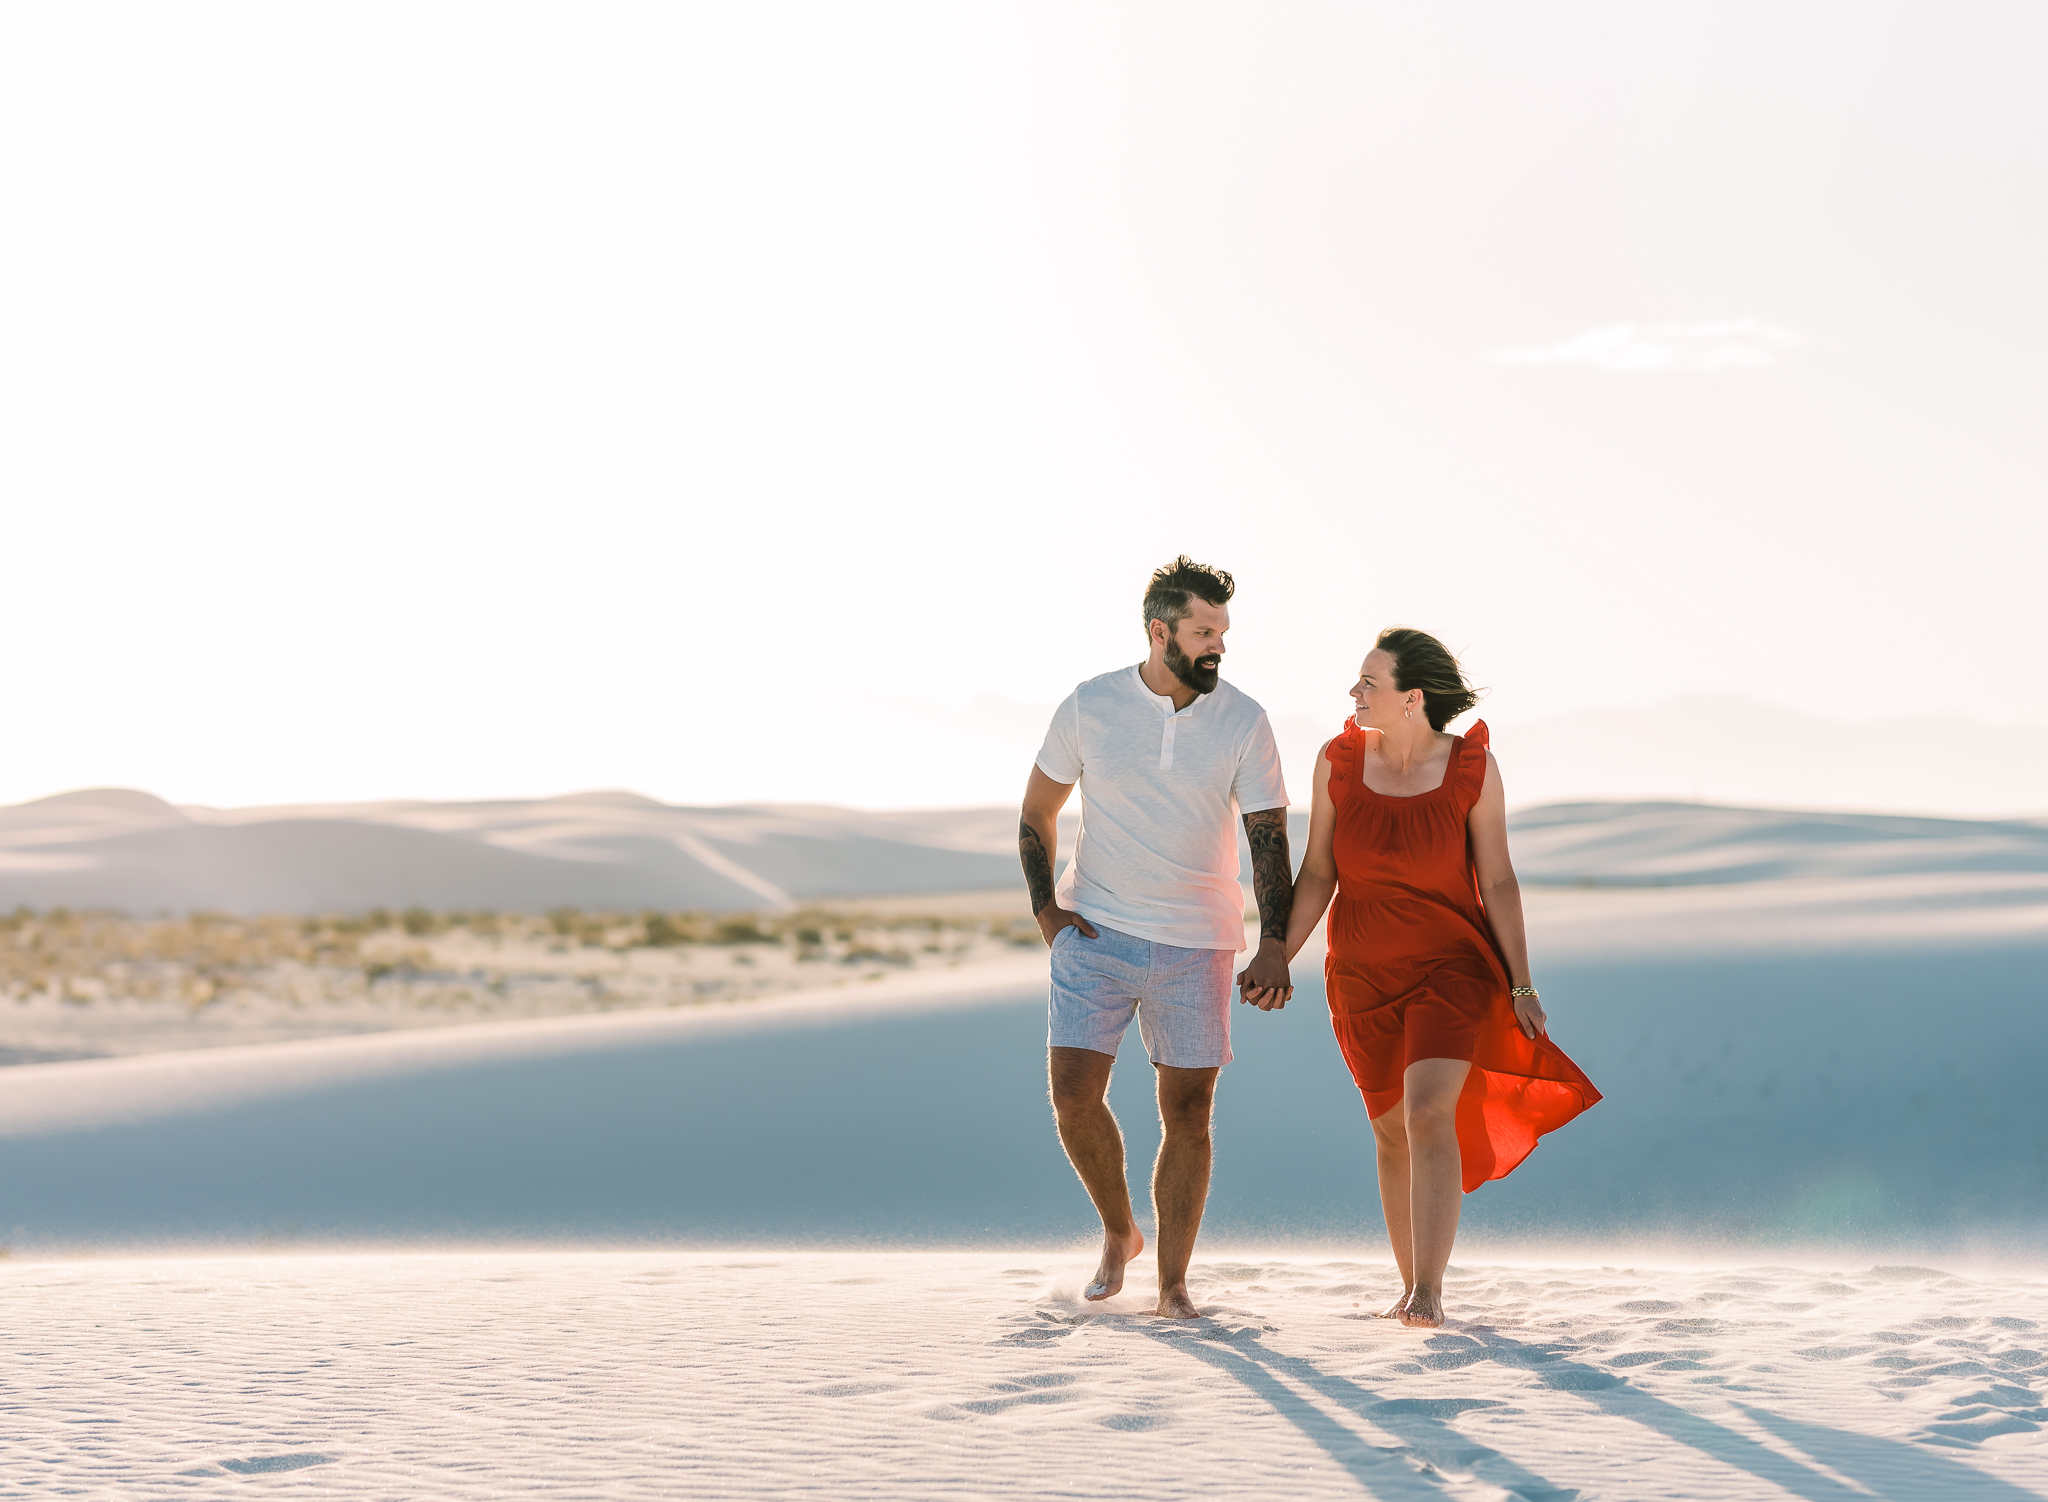 A man and woman walk hand in hand on sand dunes